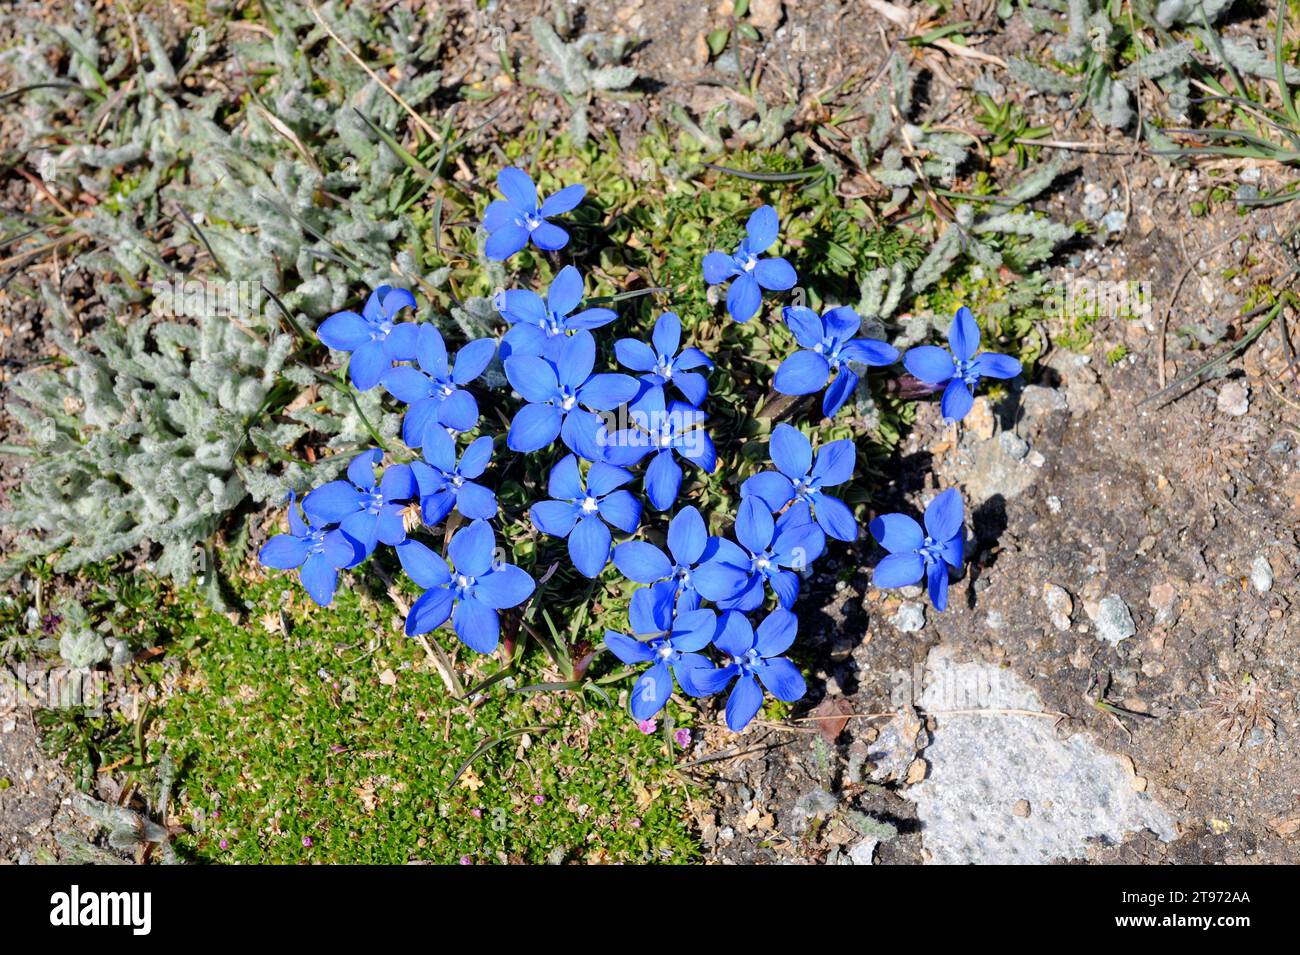 Short-leaved gentian (Gentiana brachyphylla or Gentiana verna brachyphylla) is a herb native to Alps and Pyrenees. This photo was taken in Swiss Alps. Stock Photo